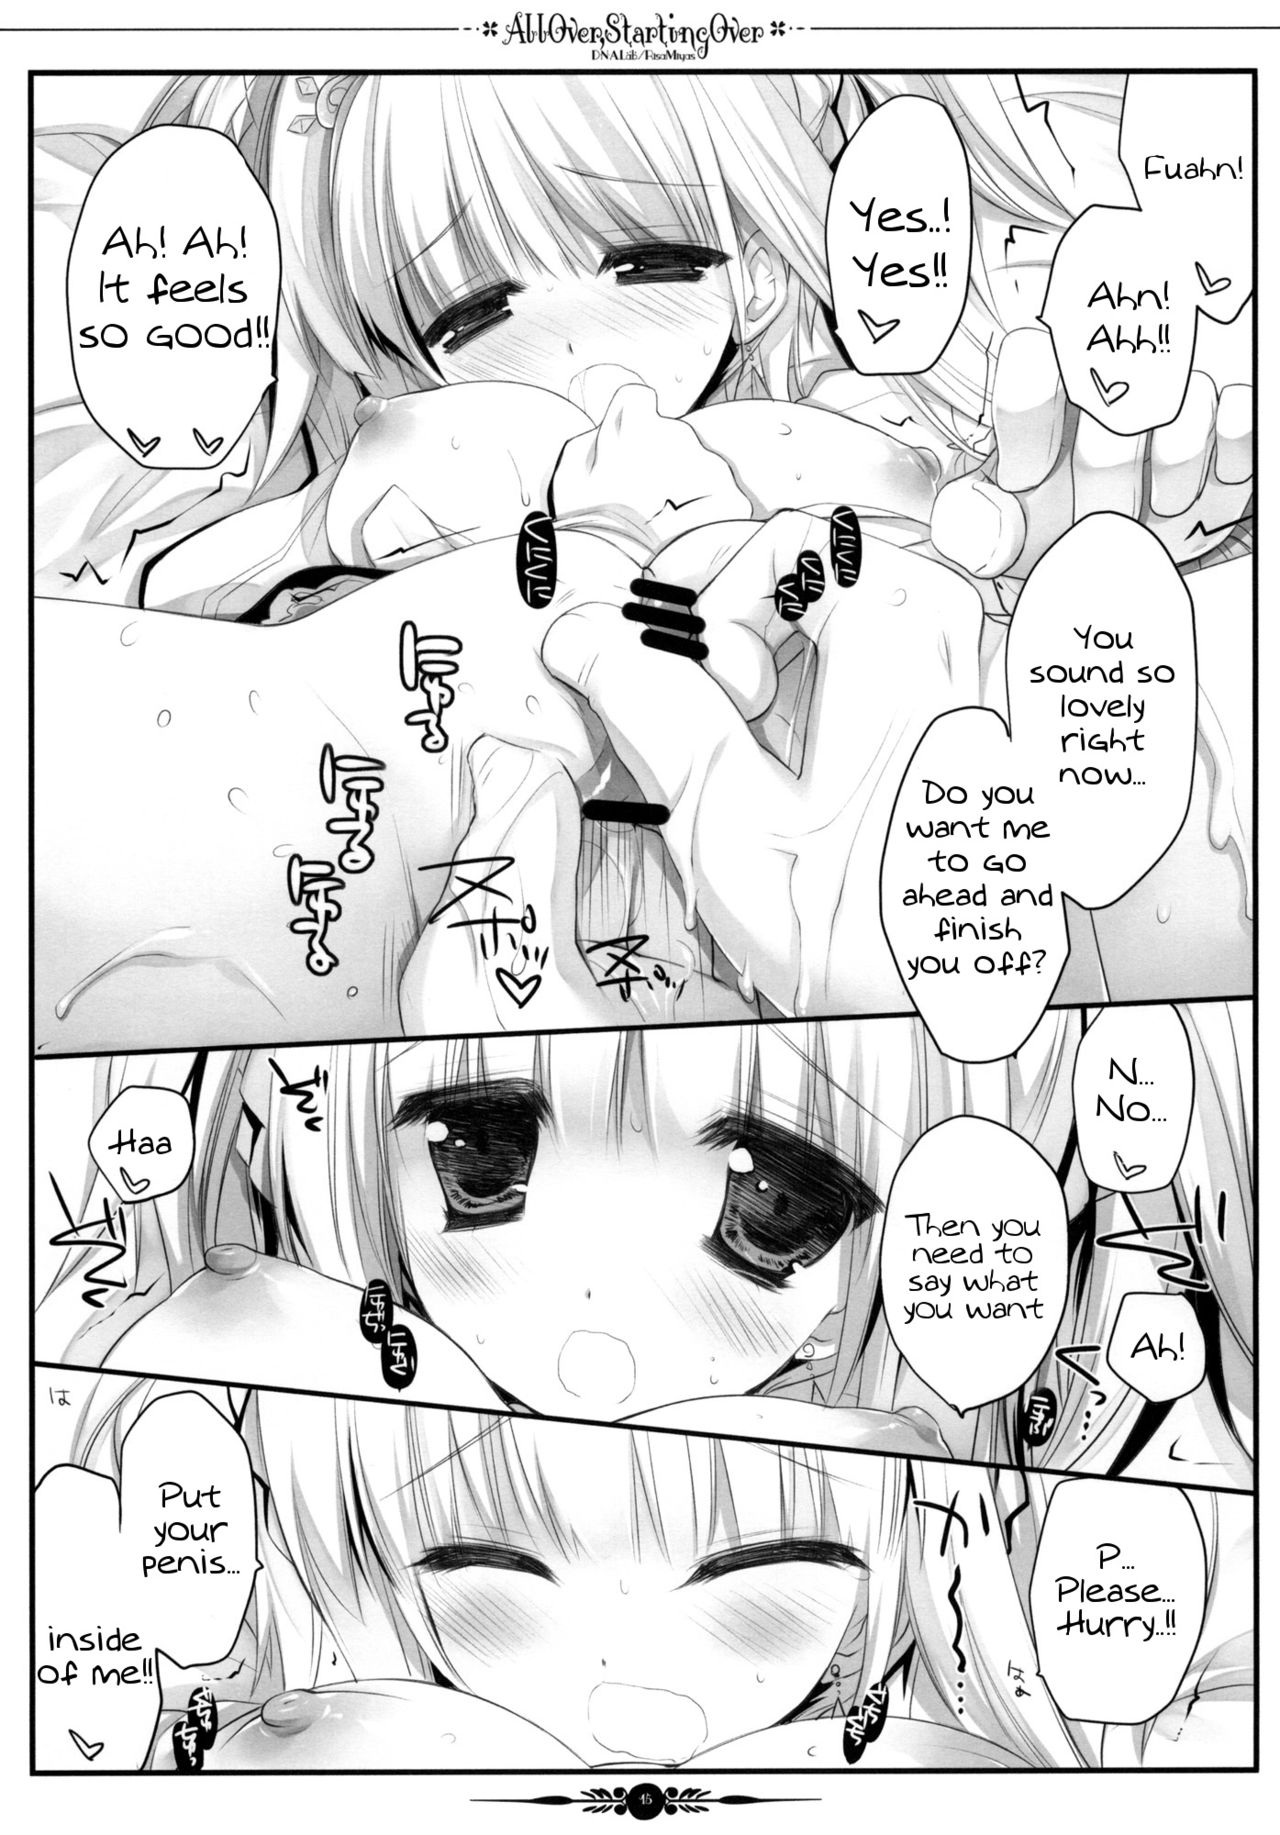 (COMIC1☆4) [D･N･A.Lab. (ミヤスリサ)] All Over, Starting Over (世界樹の迷宮III) [英訳]